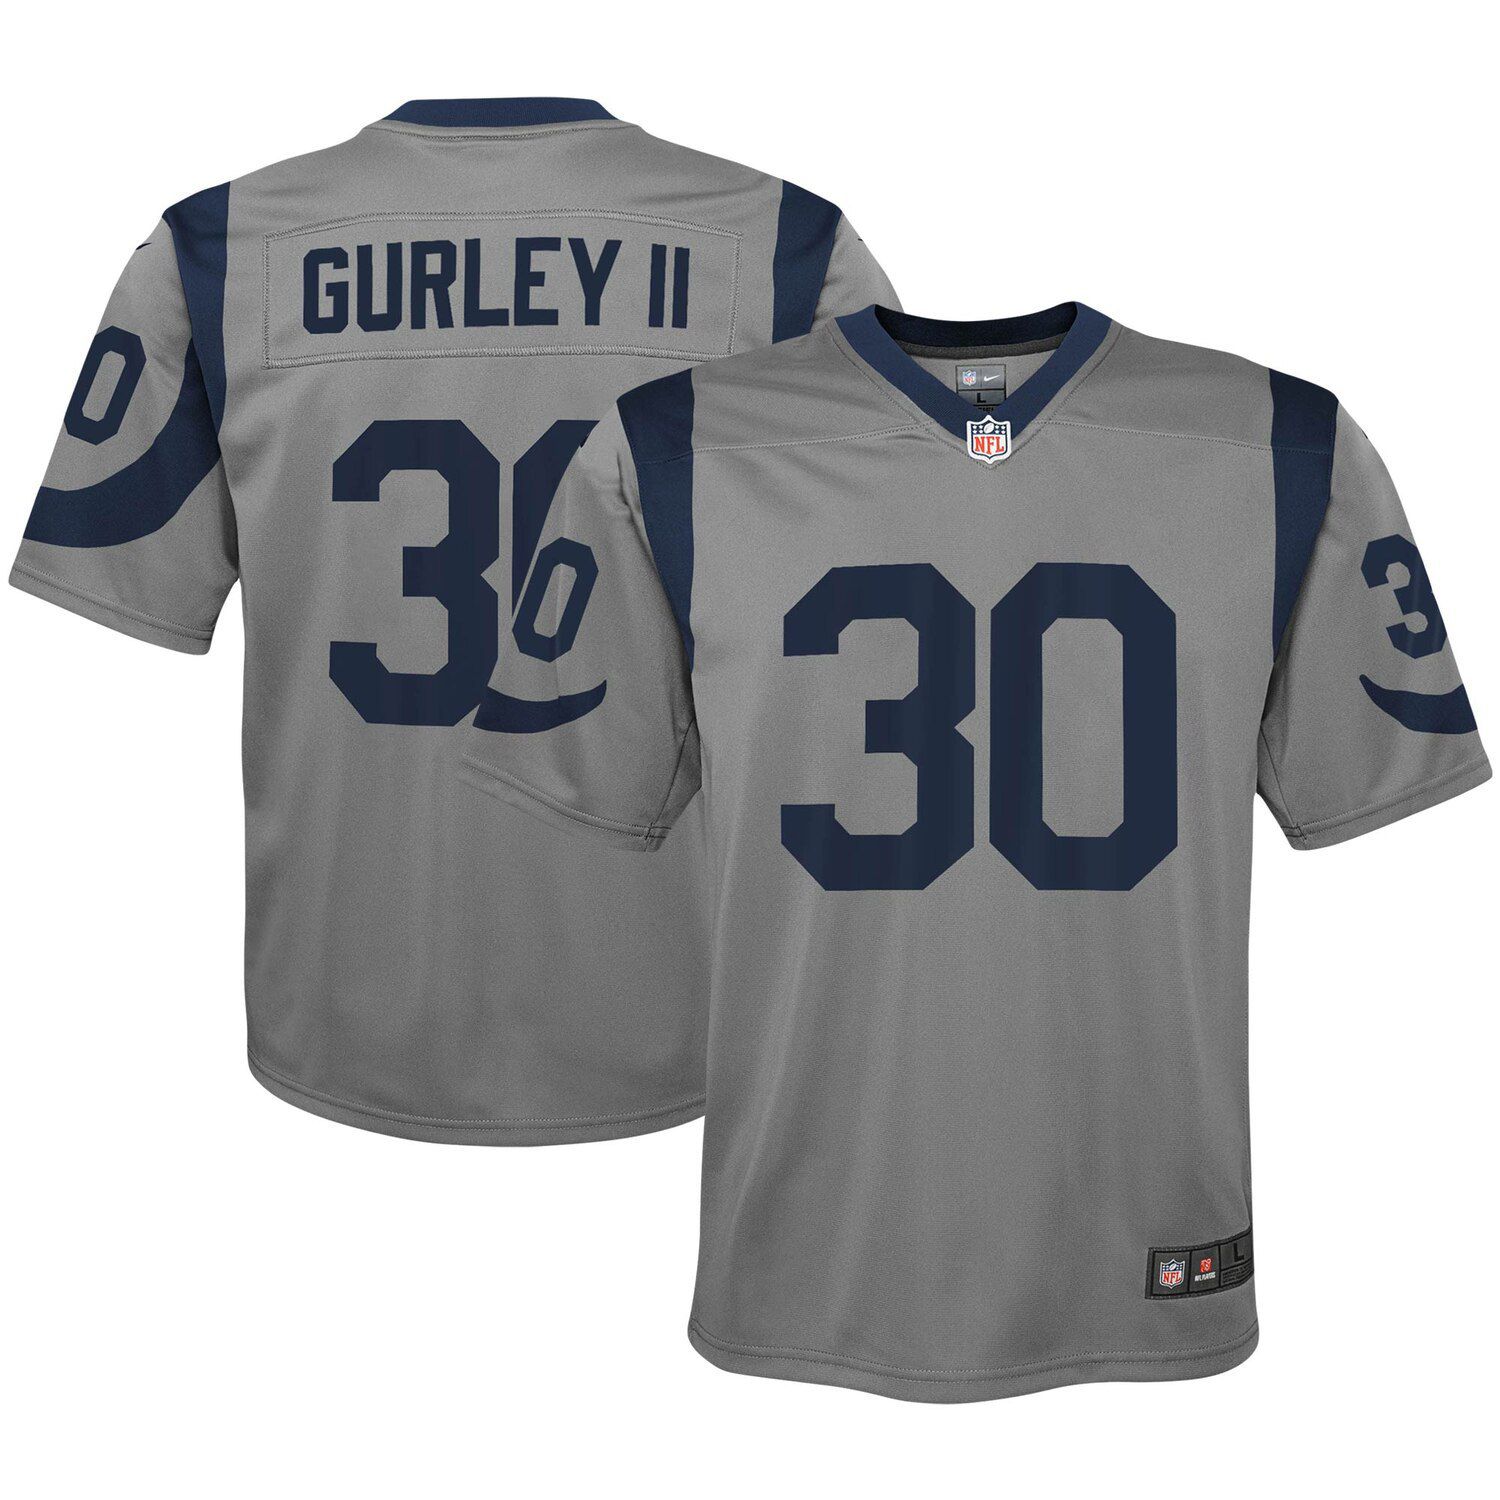 youth gurley jersey